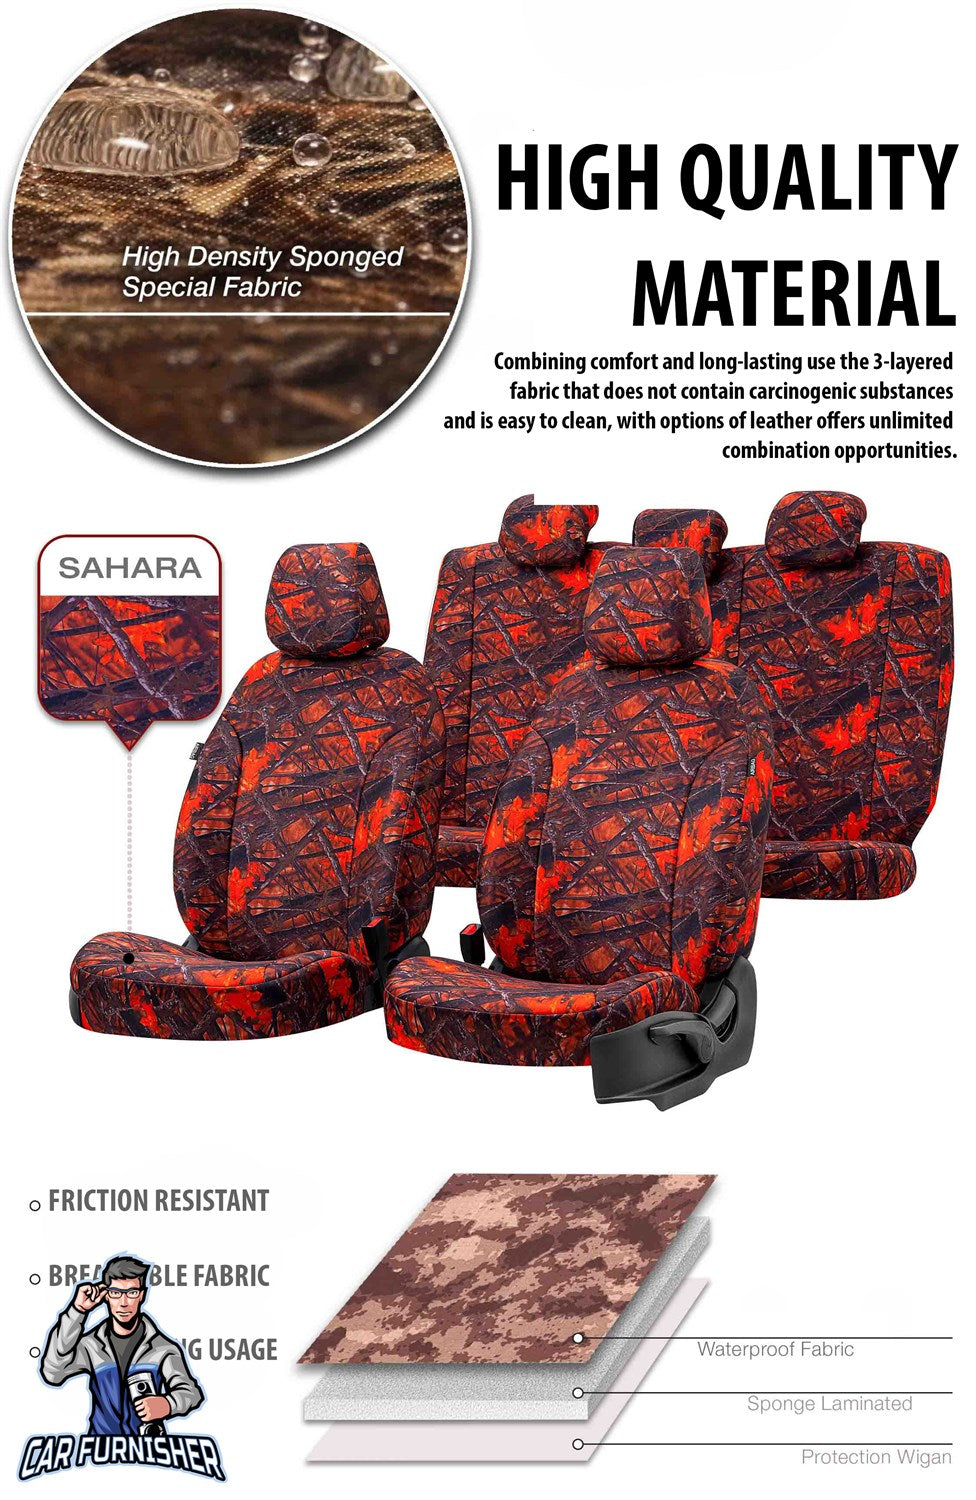 Mercedes Vito Seat Covers Camouflage Waterproof Design Montblanc Camo Waterproof Fabric